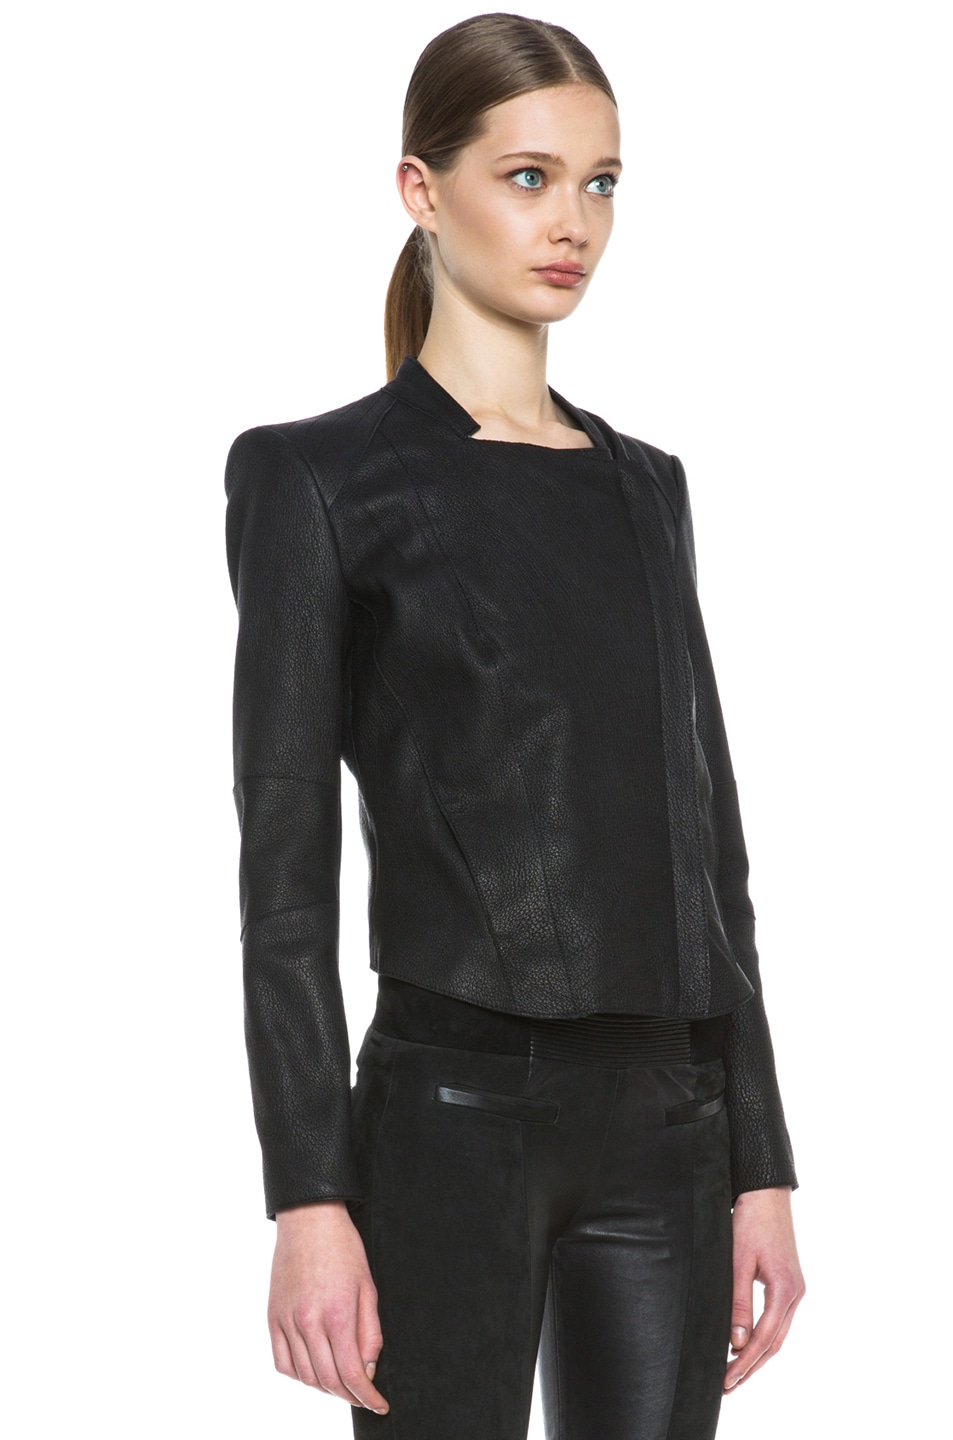 Helmut Lang Wither Leather Jacket in Black | FWRD